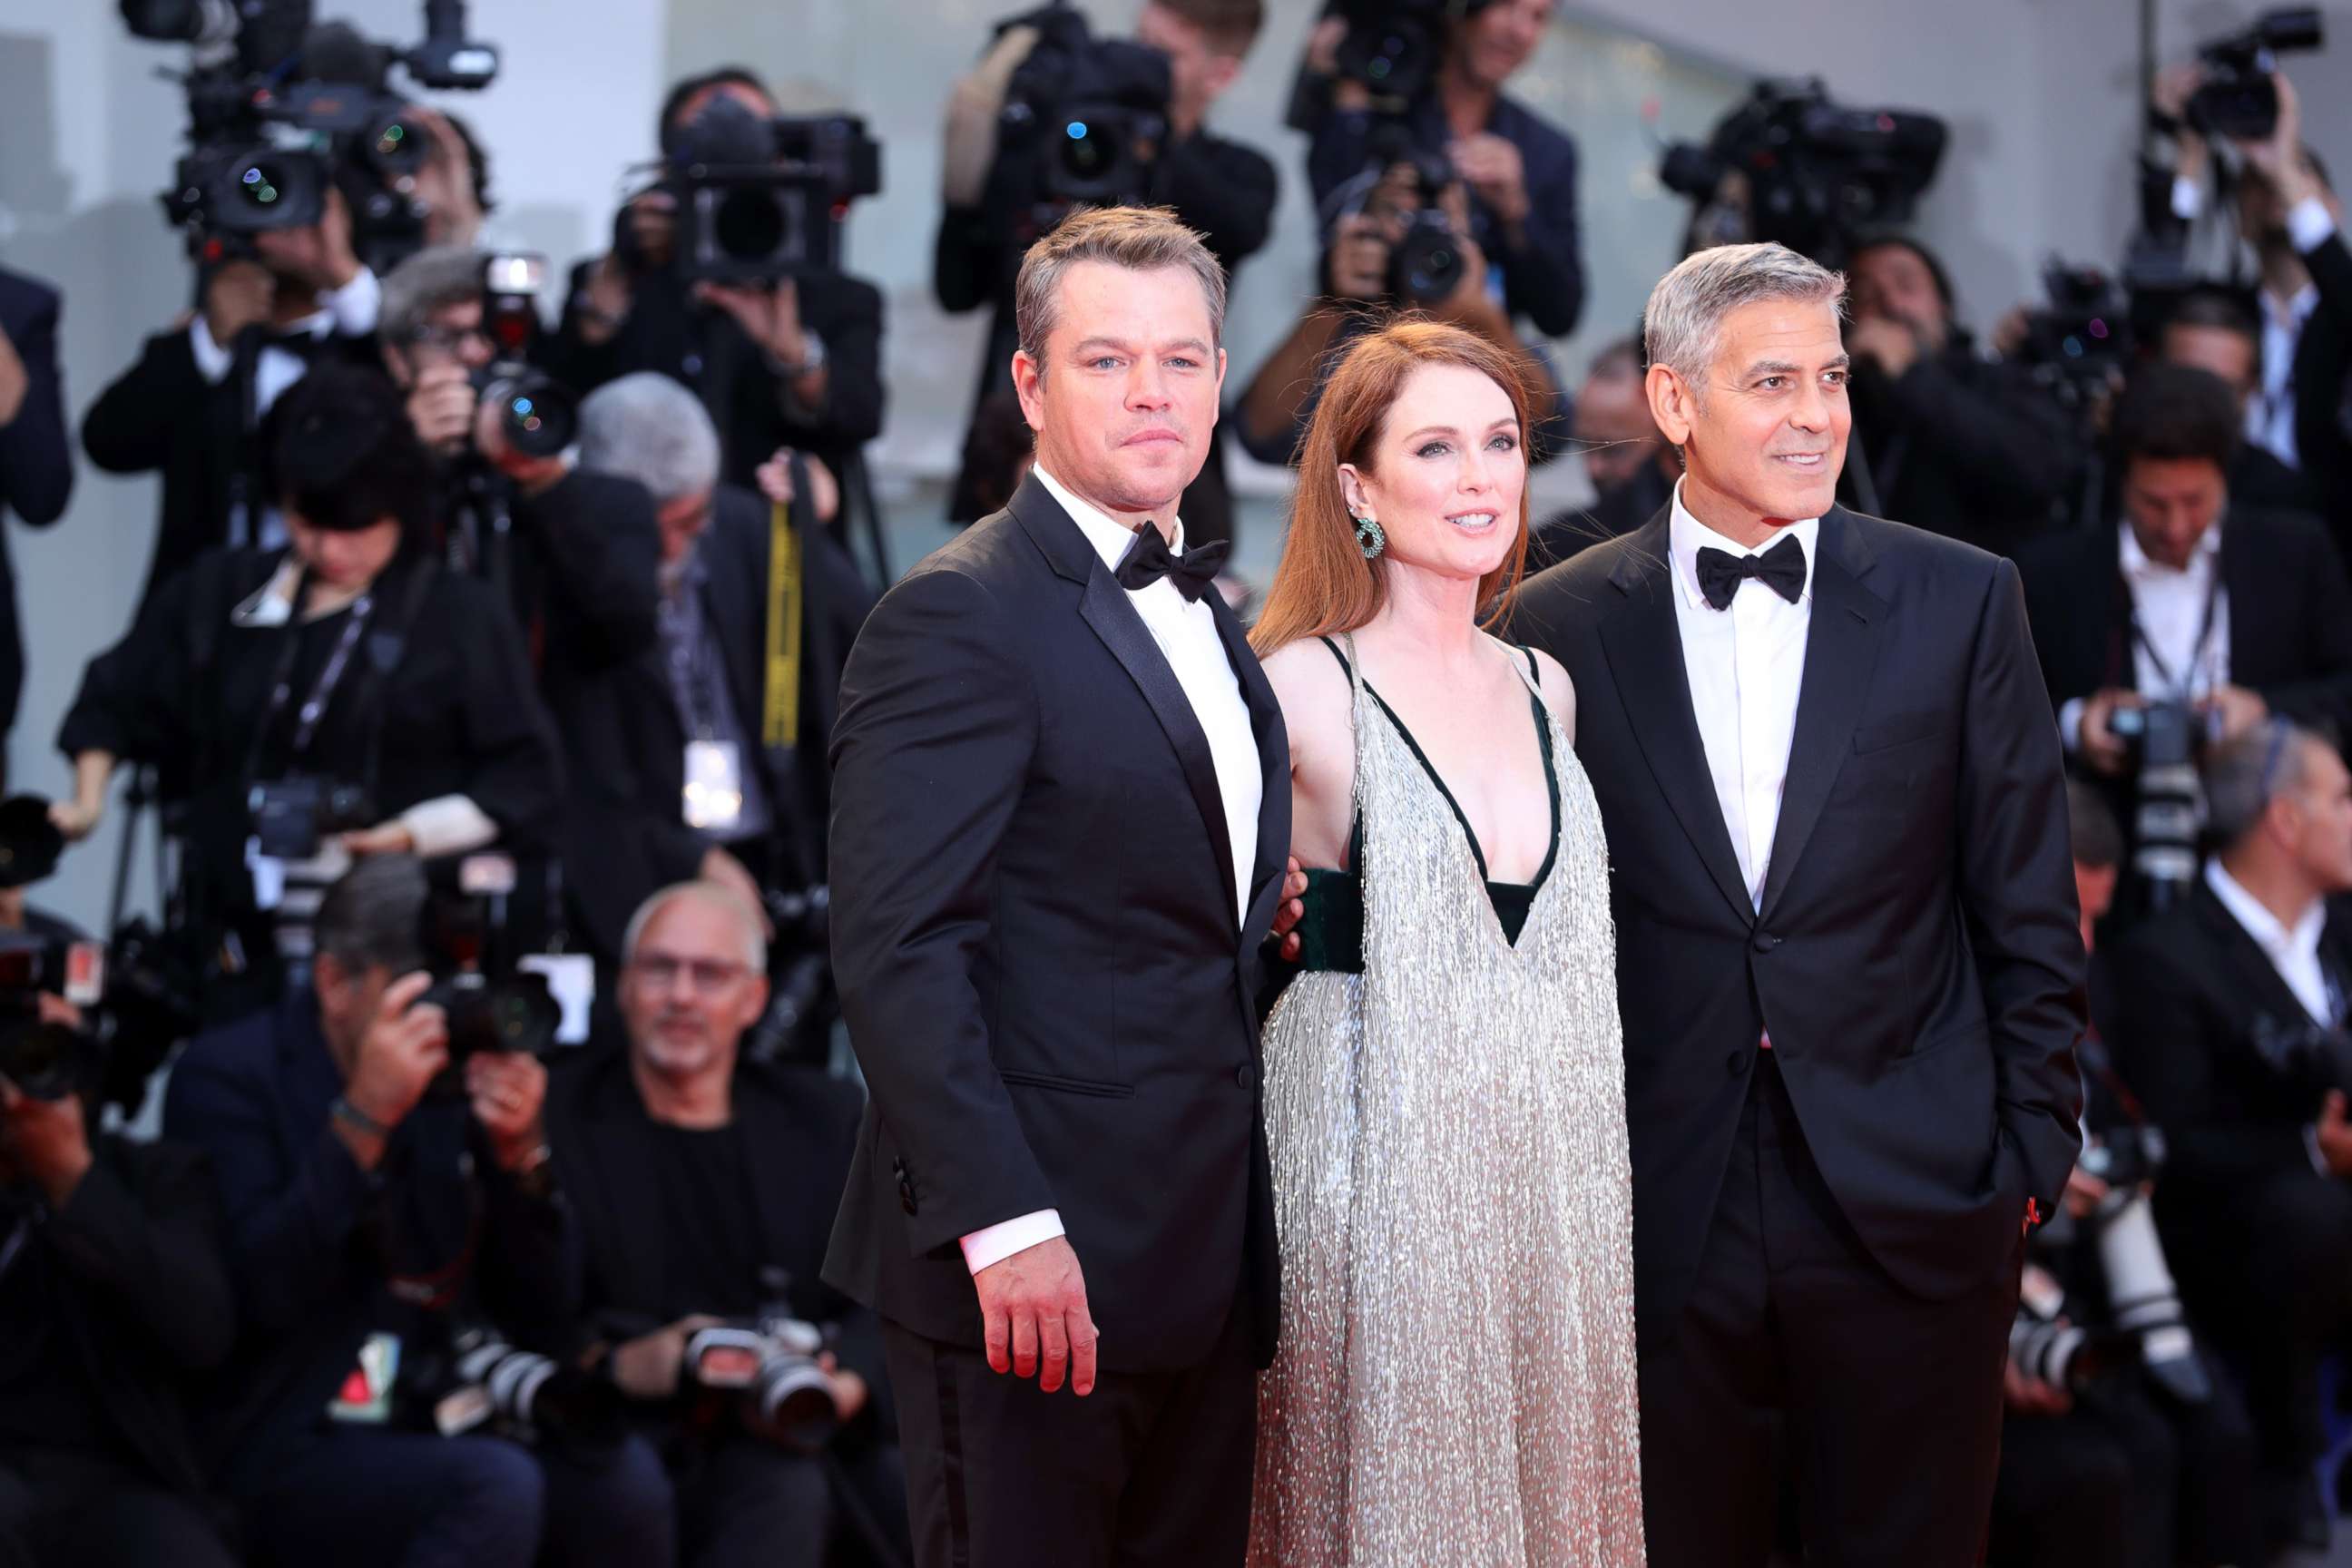 PHOTO: Matt Damon, Julianne Moore and George Clooney walk the red carpet ahead of the "Suburbicon" screening during the 74th Venice Film Festival at Sala Grande, Sept. 2, 2017 in Venice, Italy. 